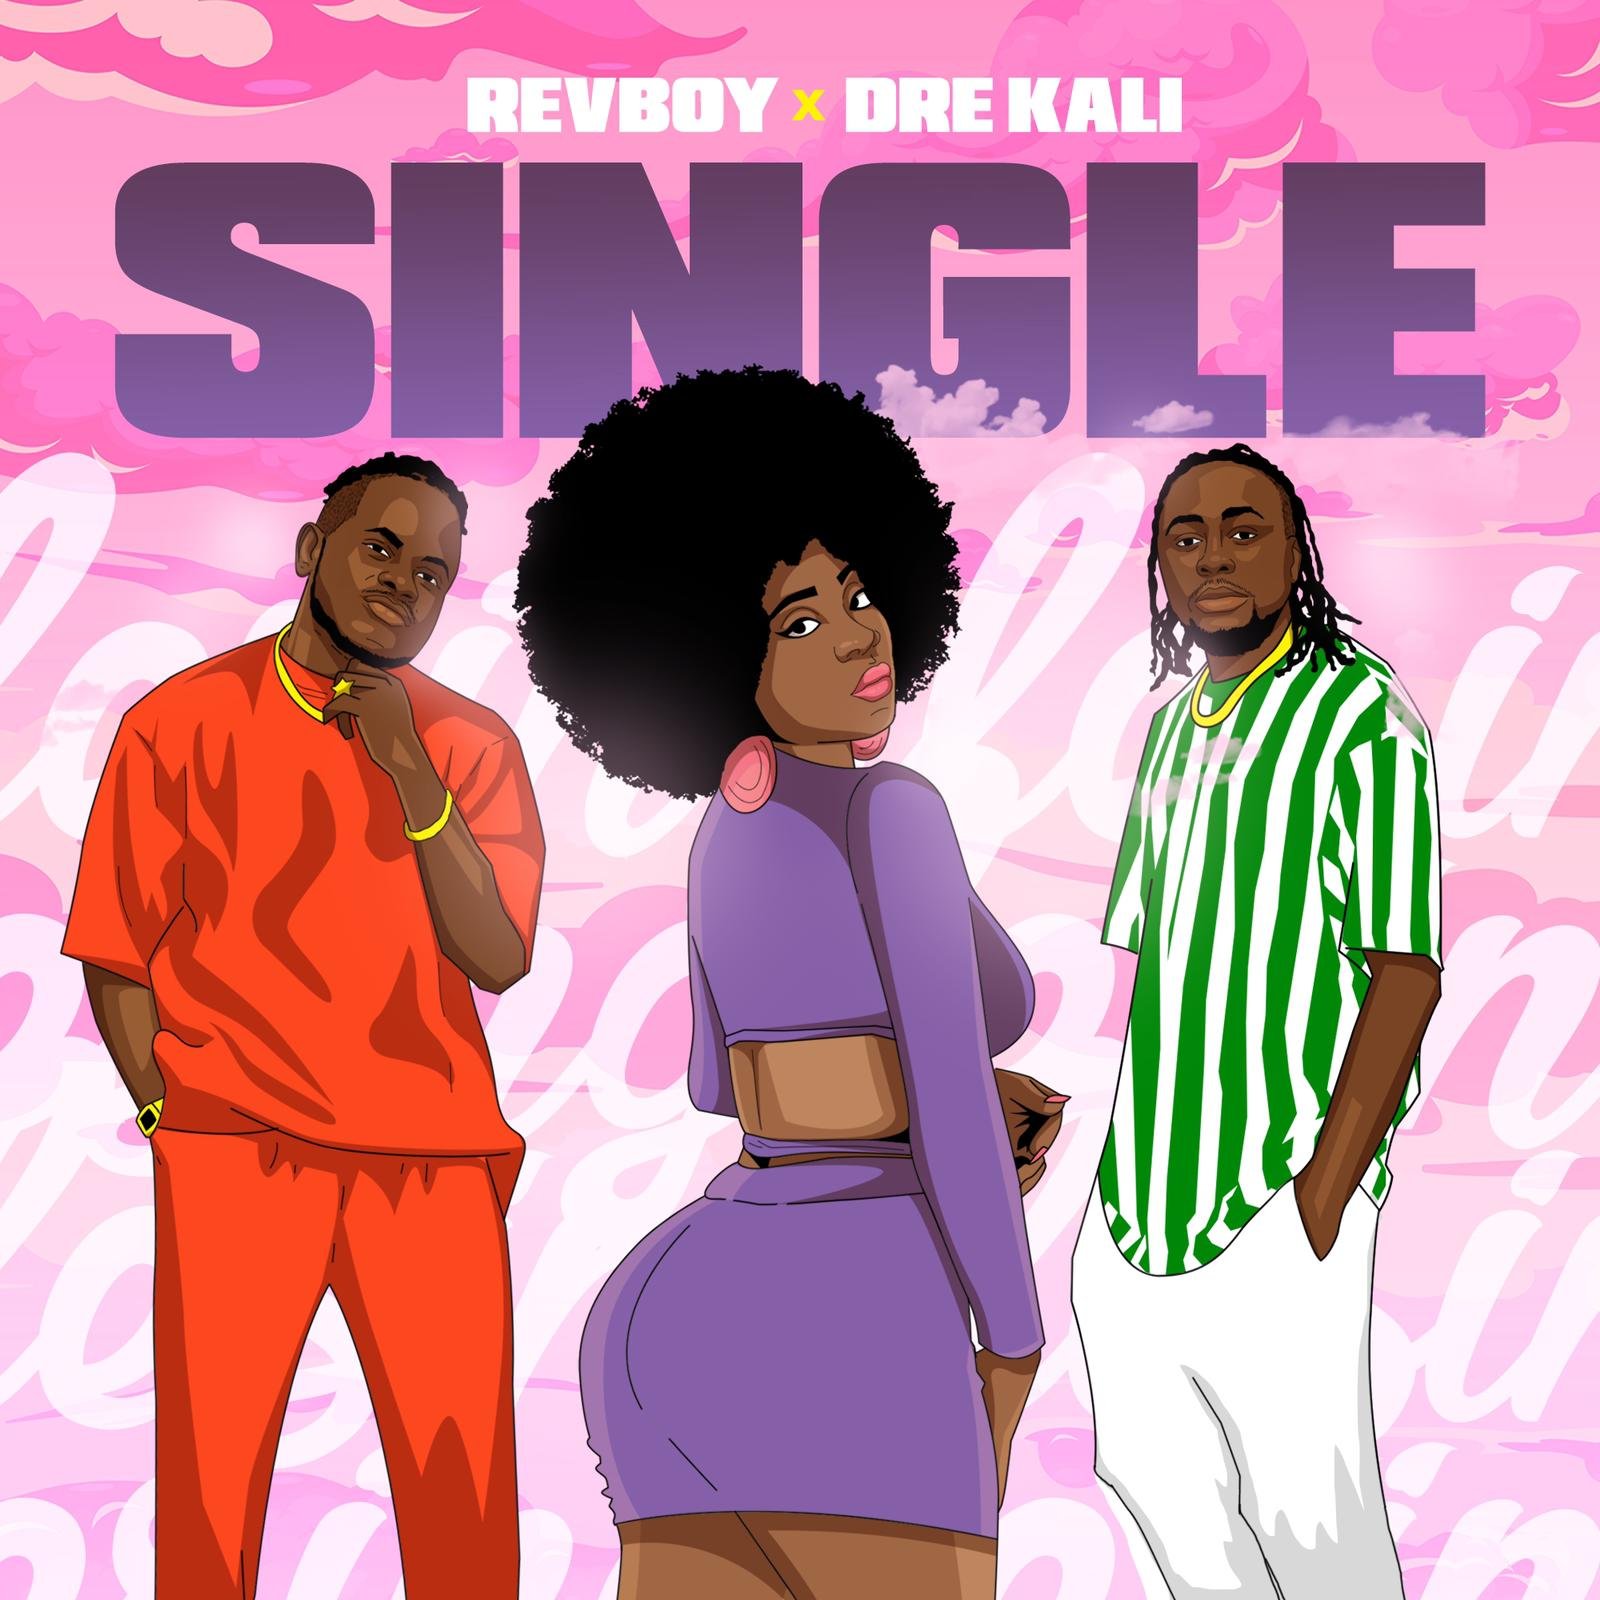 SPARKING NEW  : New Young Star Revboy Teams up with Dre Cali in a Single titled "Single (Kawala Ka Mayor)